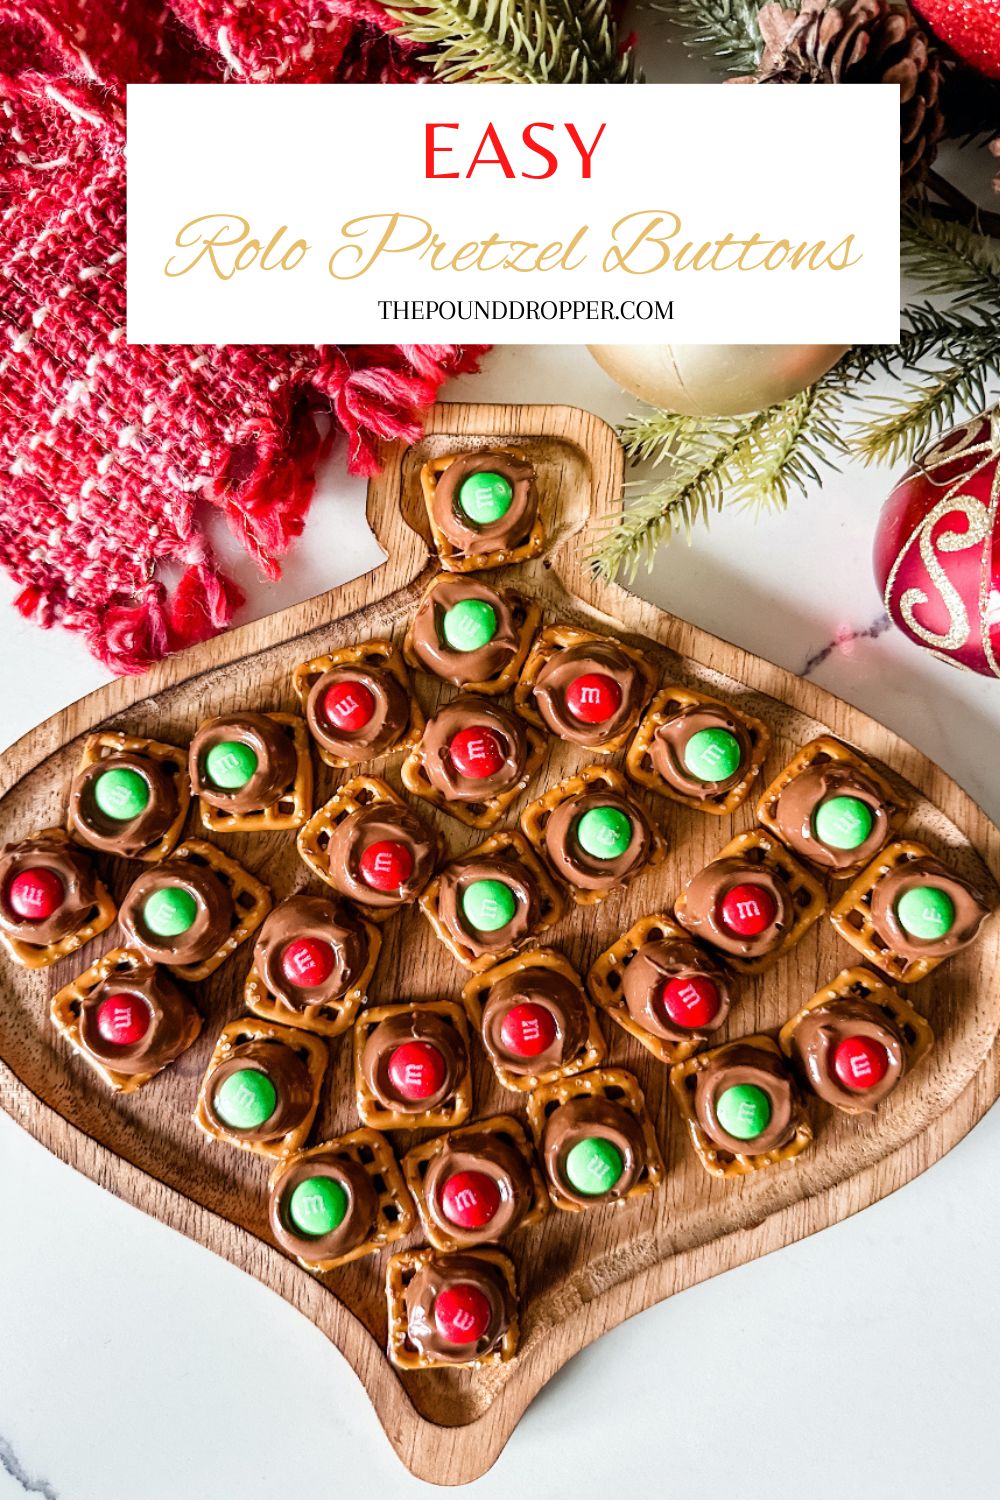 These Easy Rolo Pretzels Buttons are made with just 3 ingredients! The combination of sweet and salty treats are the perfect snack or treat!! An easy holiday treat to make this holiday season!  via @pounddropper